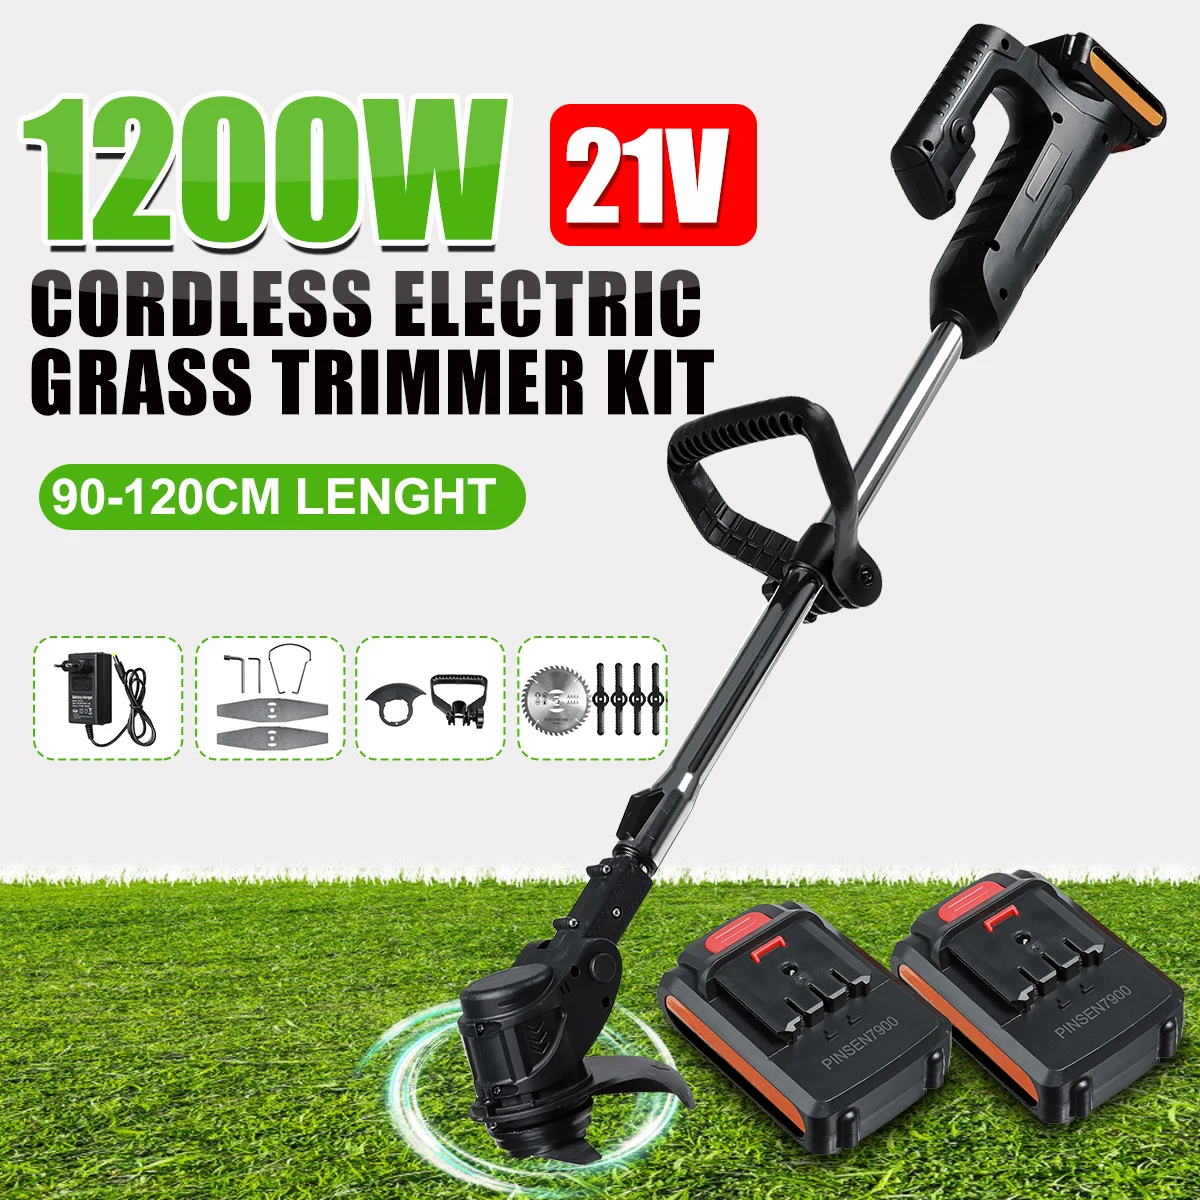 21V Electric Grass Trimmer Powerful Trimmers Brush Cutter Lawn Mower Cordless Cutting Machine Garden Tools with Li Battery